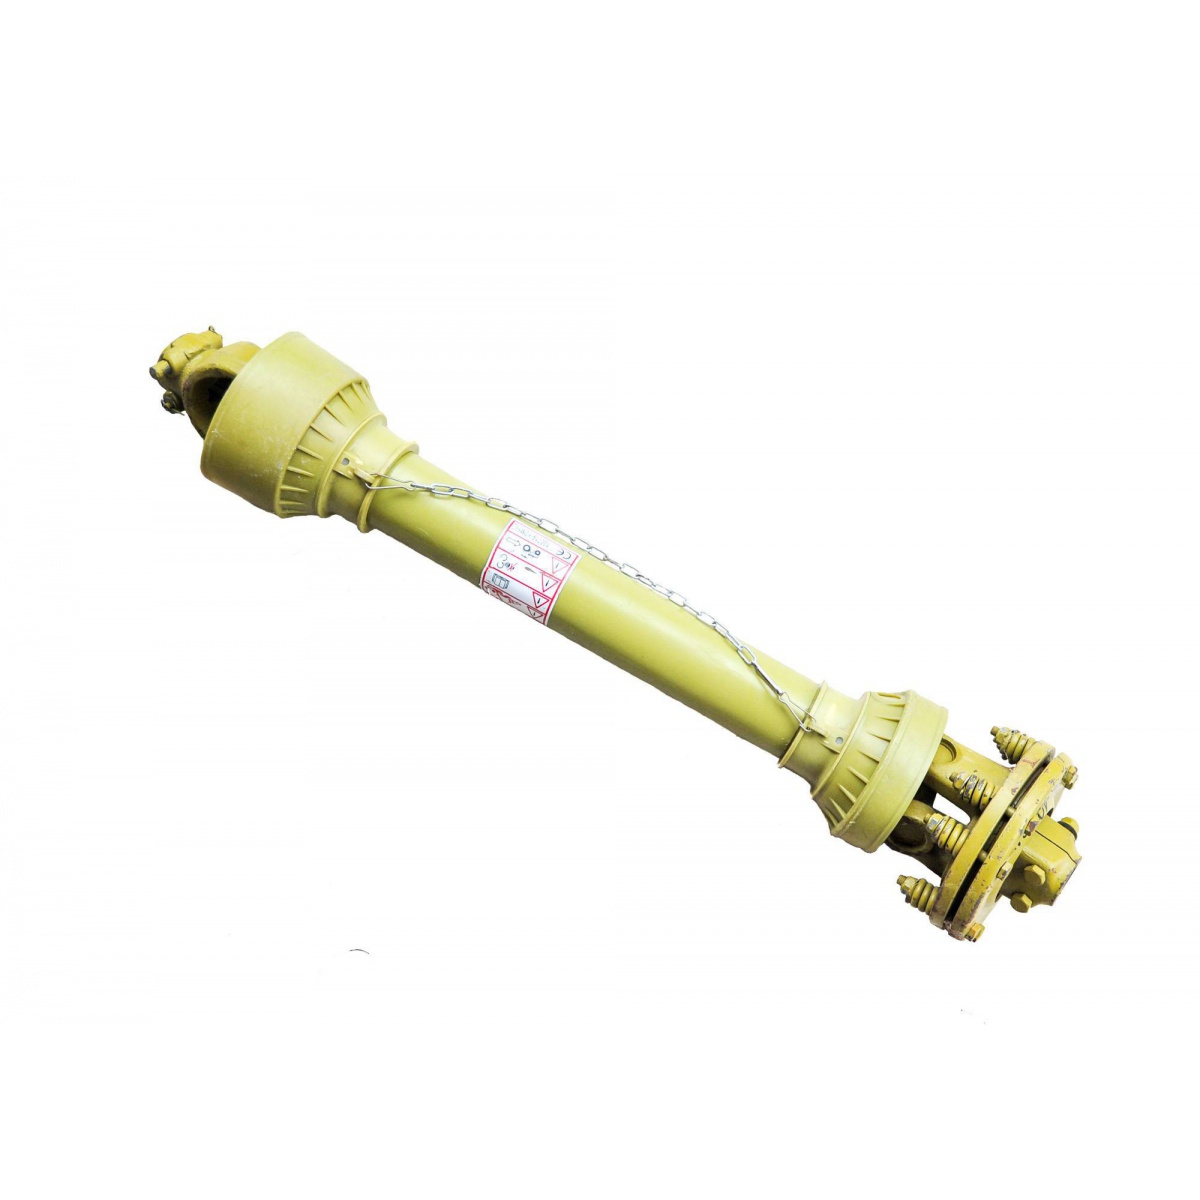 PTO shaft with clutch 07B - 150 cm / up to 105 HP